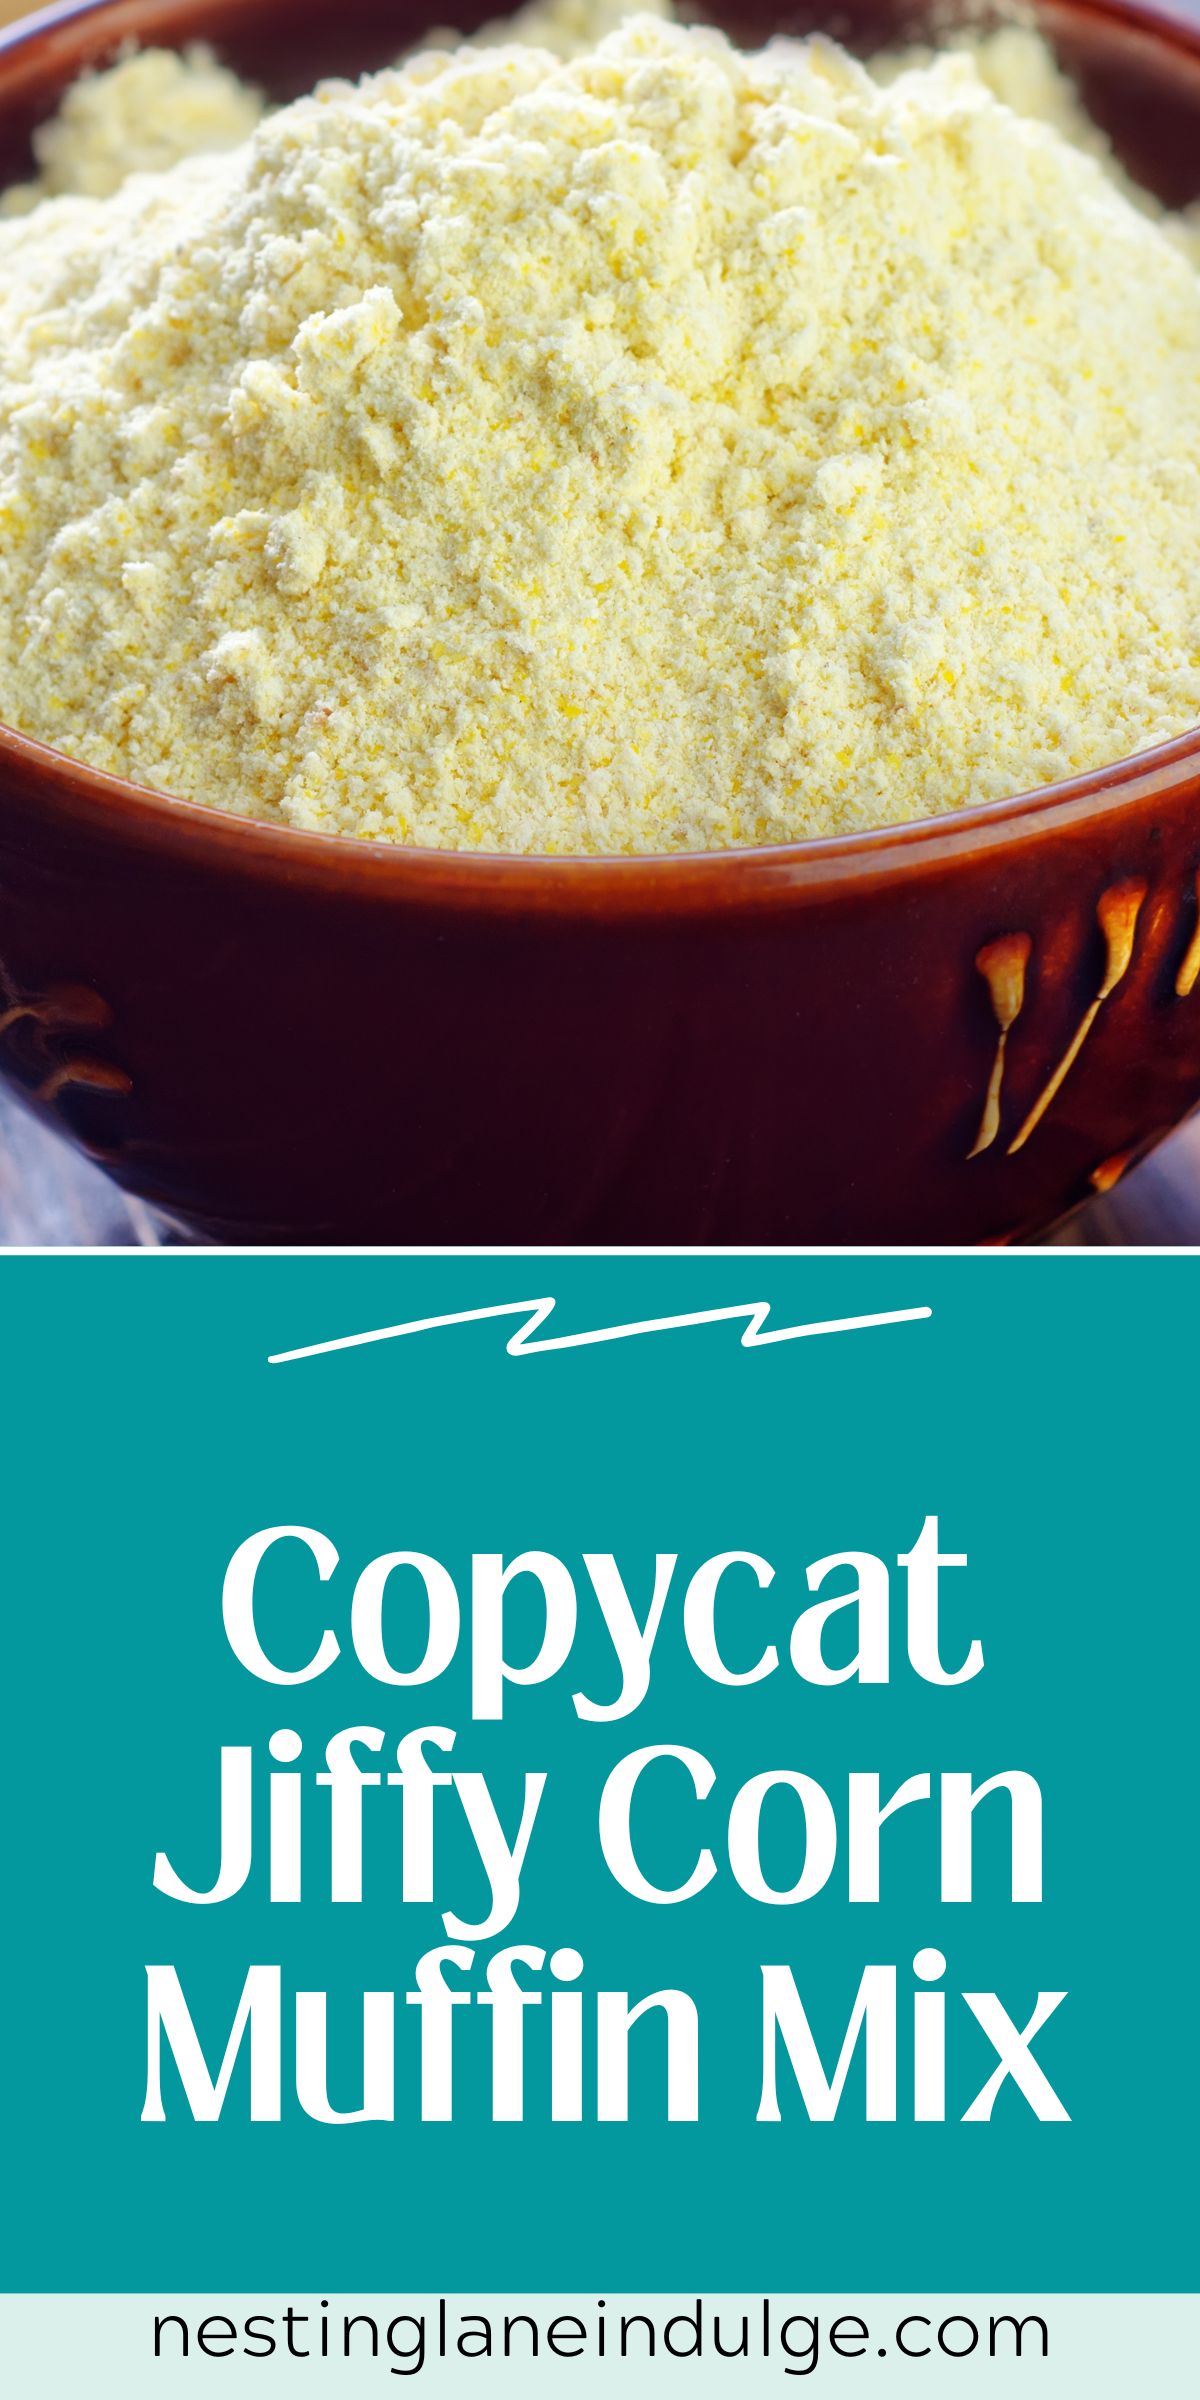 Graphic for Pinterest of Copycat Jiffy Corn Muffin Mix Recipe.